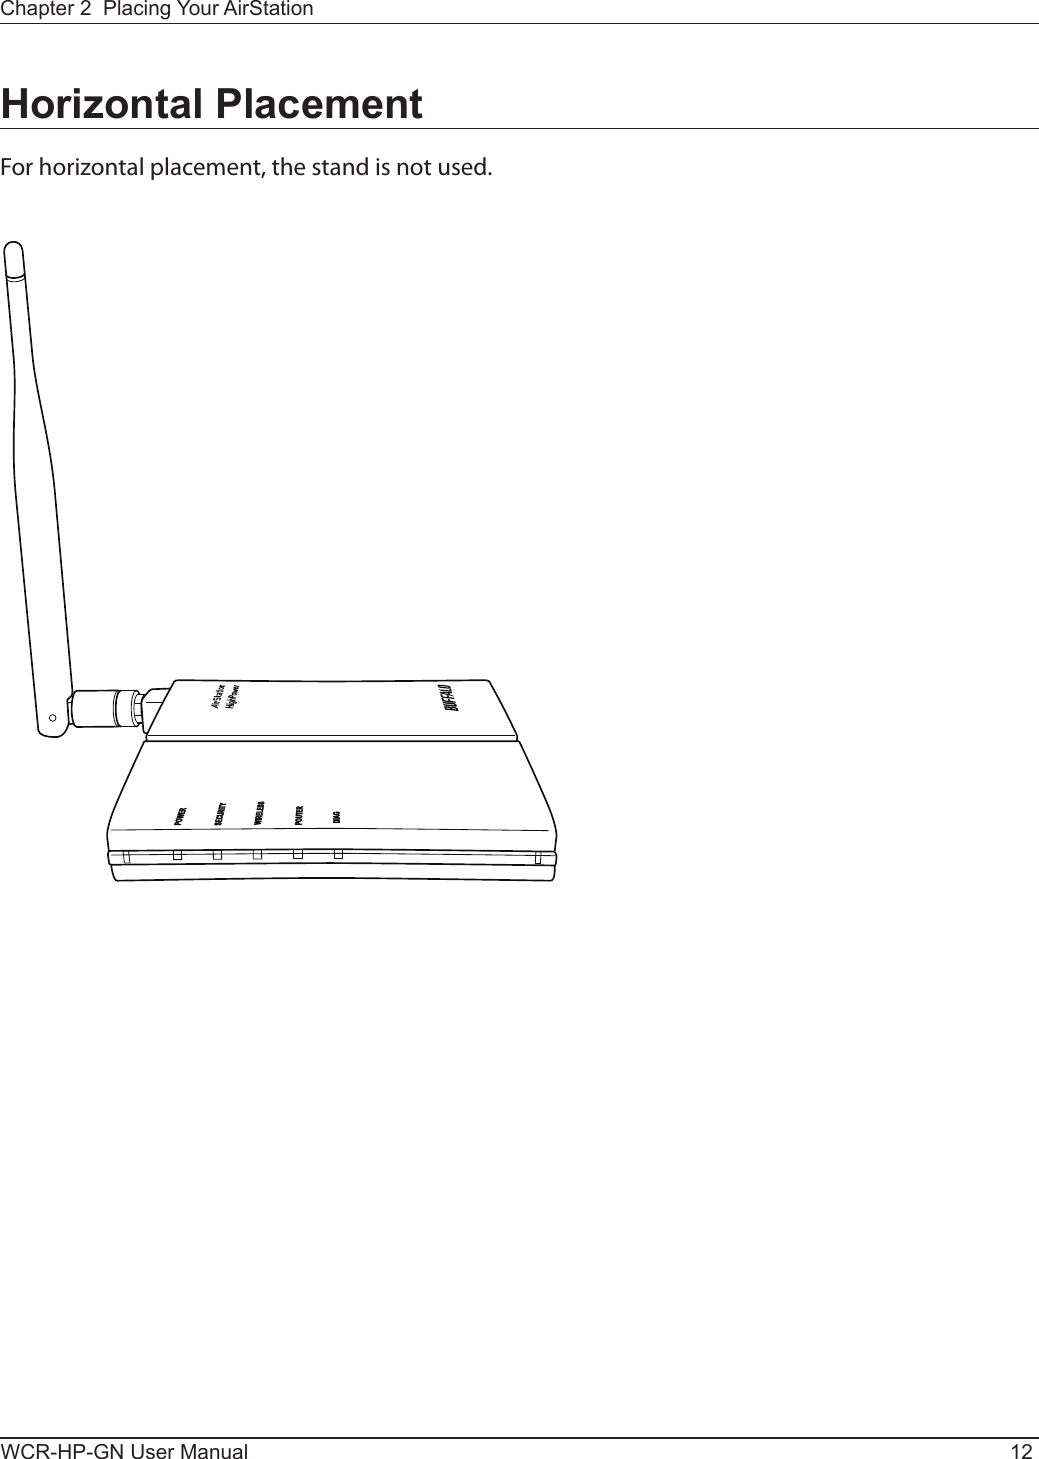 WCR-HP-GN User Manual 12Chapter 2  Placing Your AirStationHorizontal PlacementFor horizontal placement, the stand is not used.